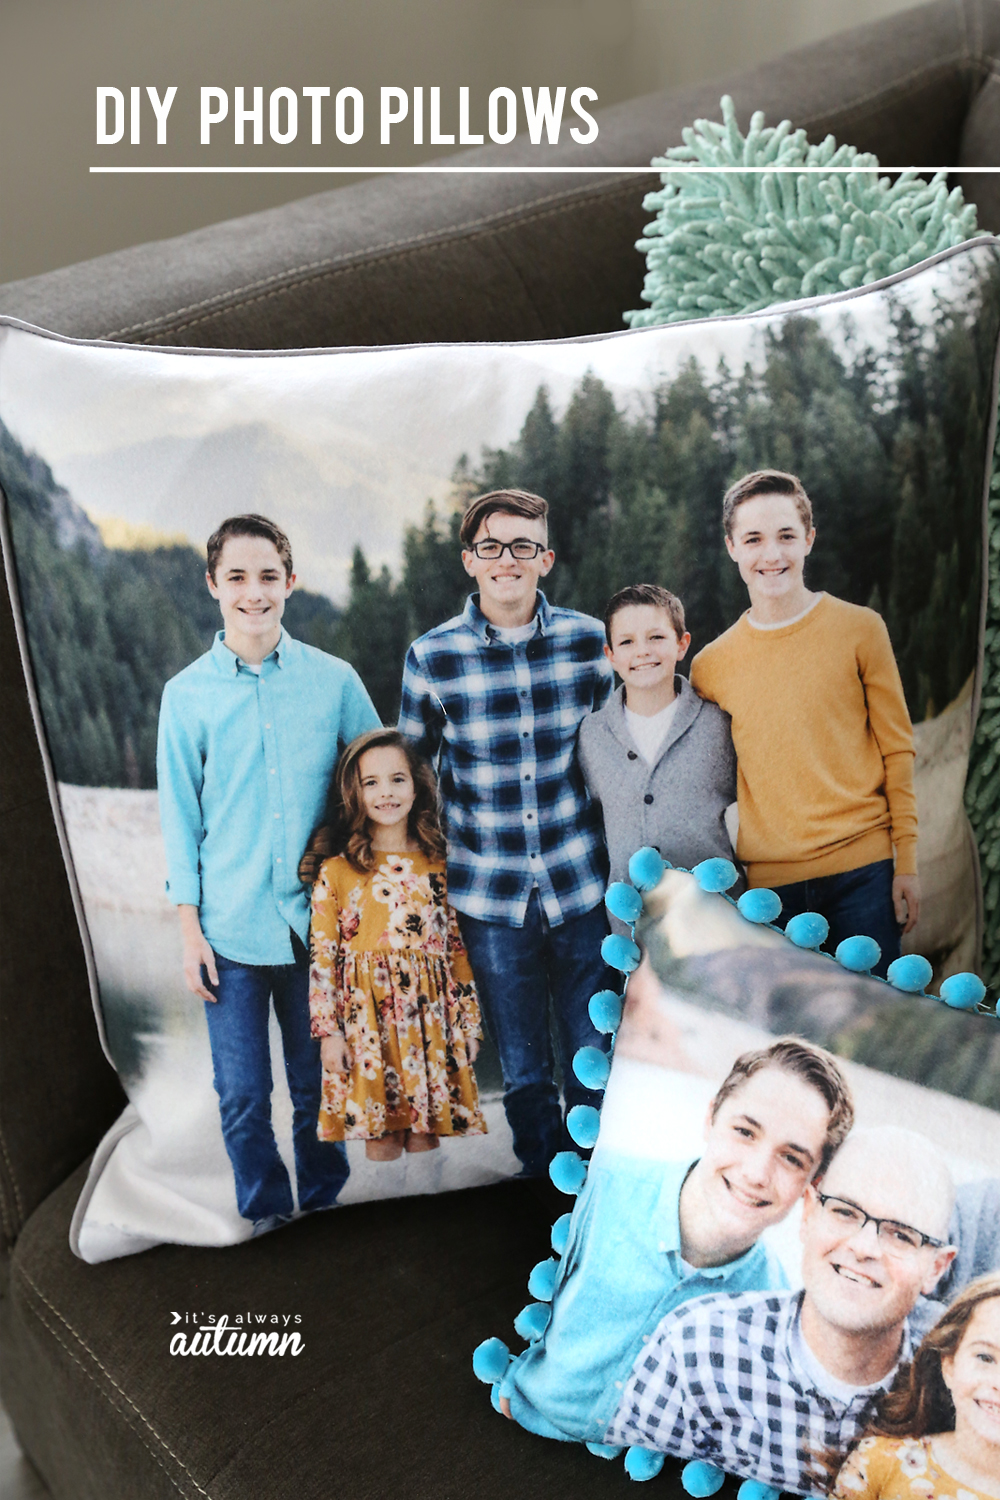 How to make personalized photo pillows.